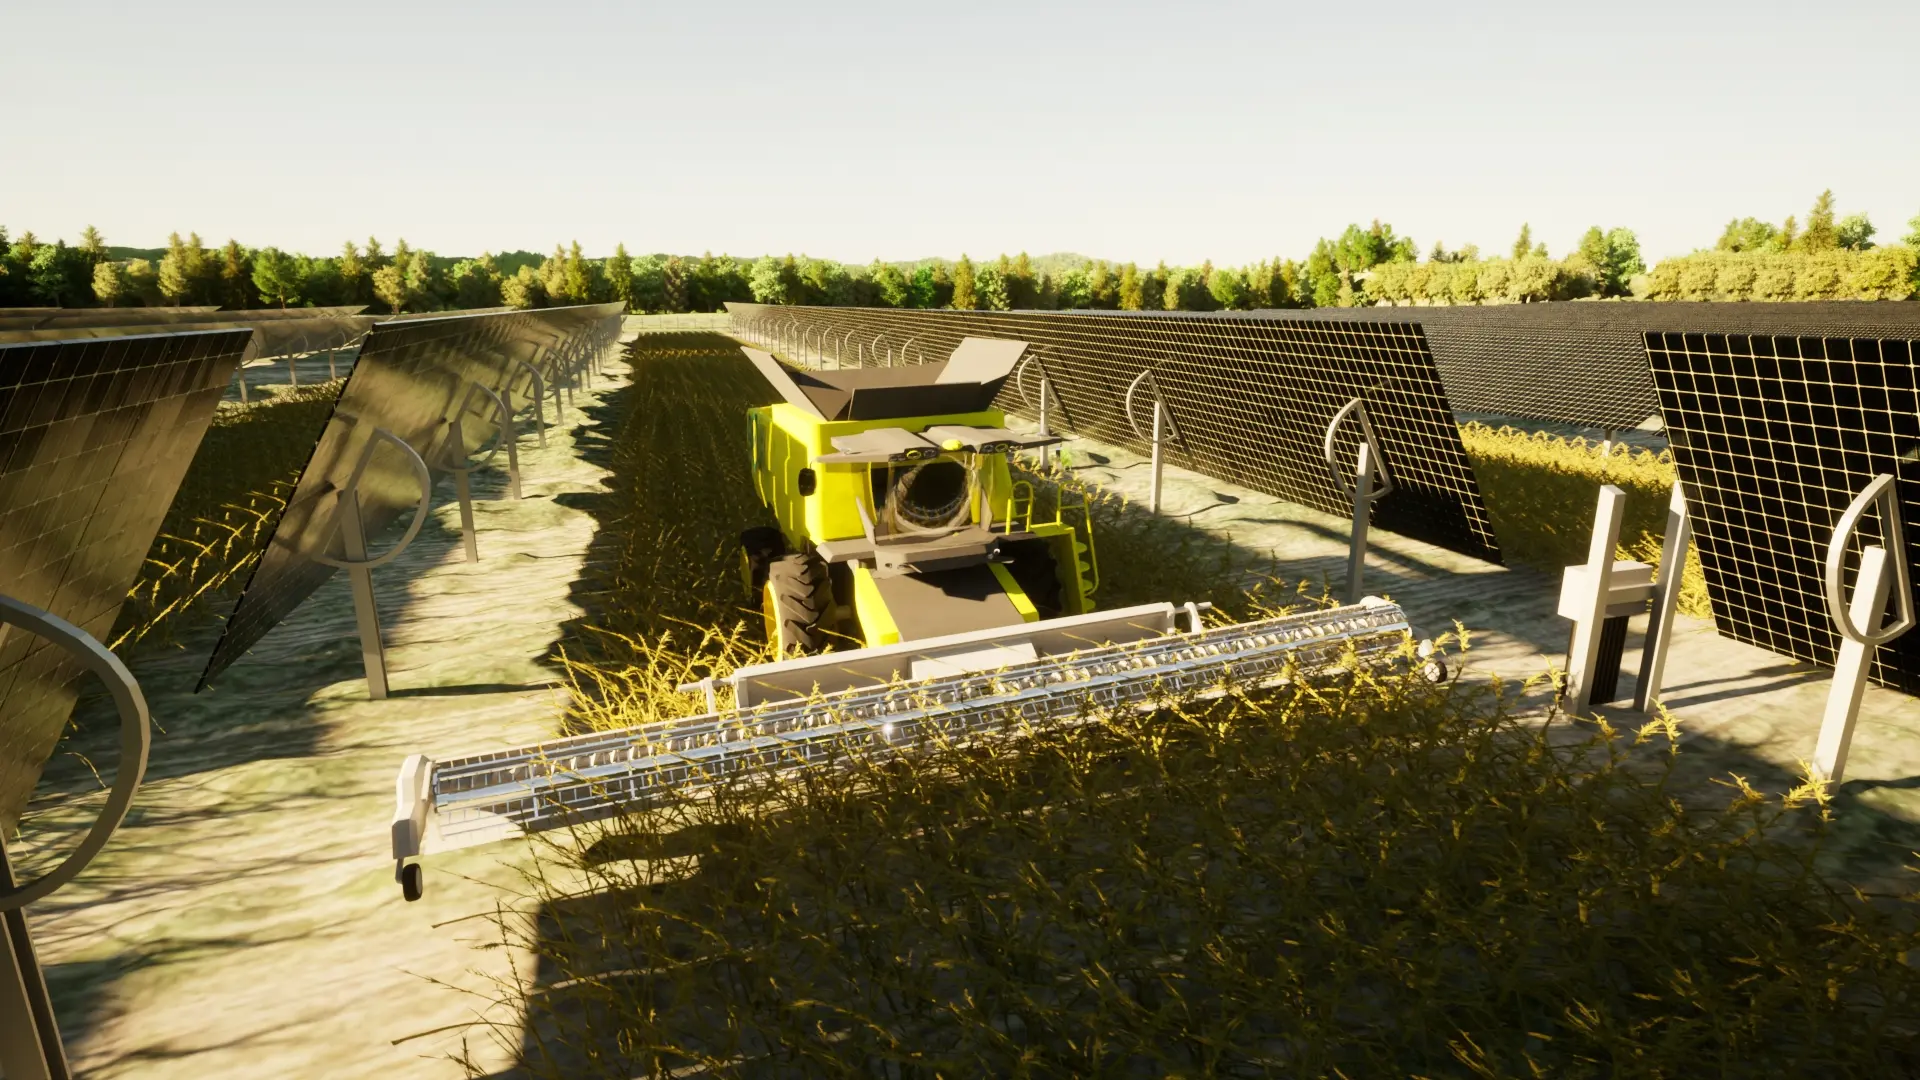 Combining Solar Energy and Agriculture – Sweden's Largest Agrivoltaic Park